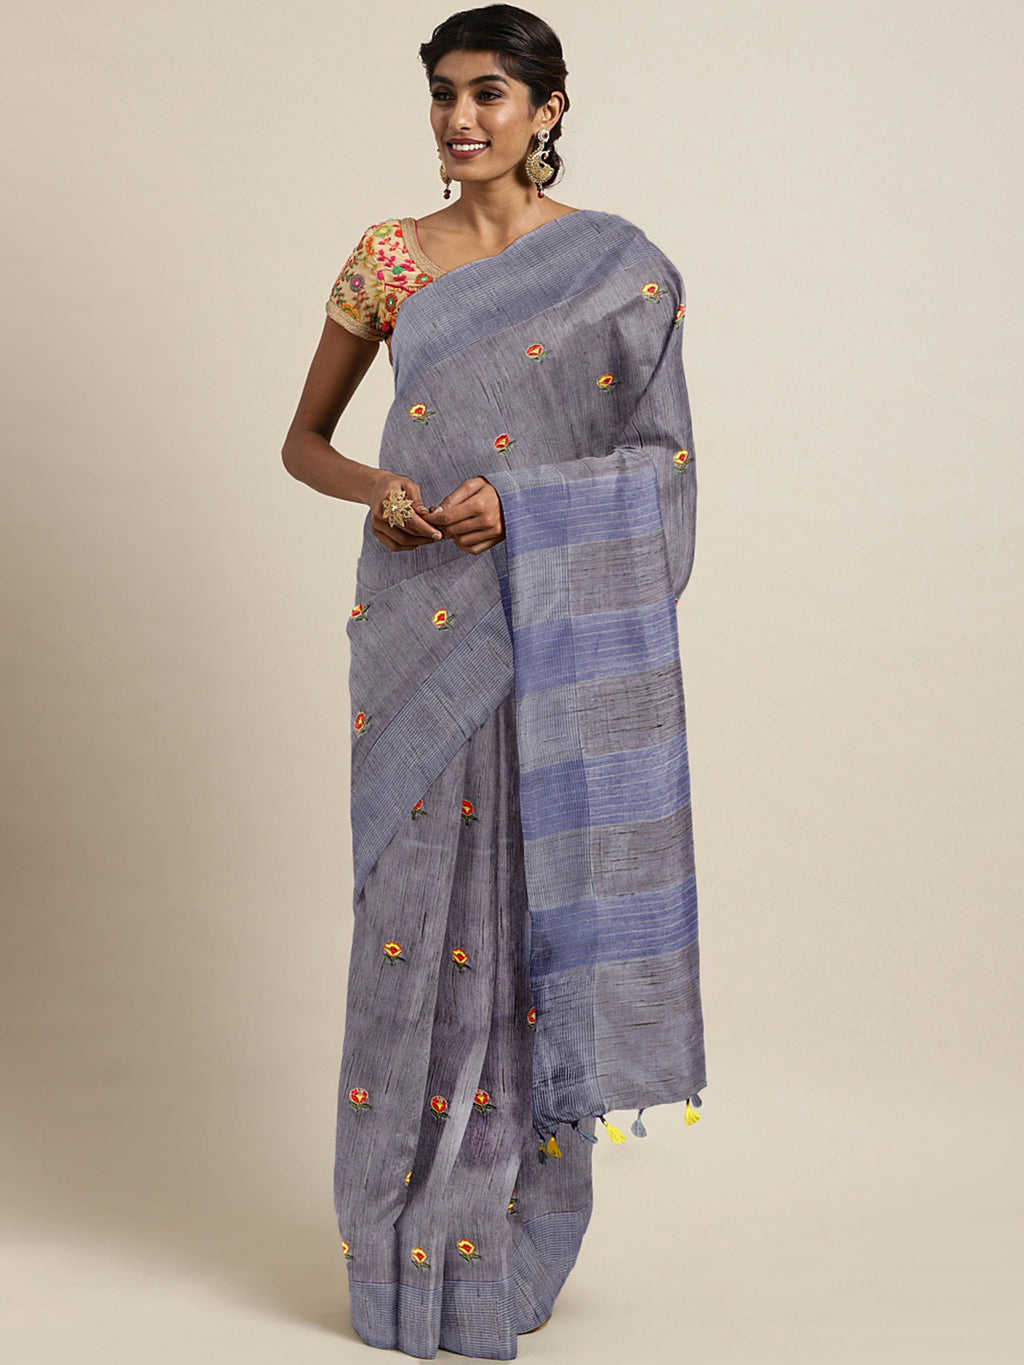 Kalakari India Kota Silk Embroidered Saree With Blouse ALBGSA0163-Saree-Kalakari India-ALBGSA0163-Geographical Indication, Hand Crafted, Heritage Prints, Linen, Natural Dyes, Pure Cotton, Sarees, Sustainable Fabrics, Woven-[Linen,Ethnic,wear,Fashionista,Handloom,Handicraft,Indigo,blockprint,block,print,Cotton,Chanderi,Blue, latest,classy,party,bollywood,trendy,summer,style,traditional,formal,elegant,unique,style,hand,block,print, dabu,booti,gift,present,glamorous,affordable,collectible,Sari,Sare